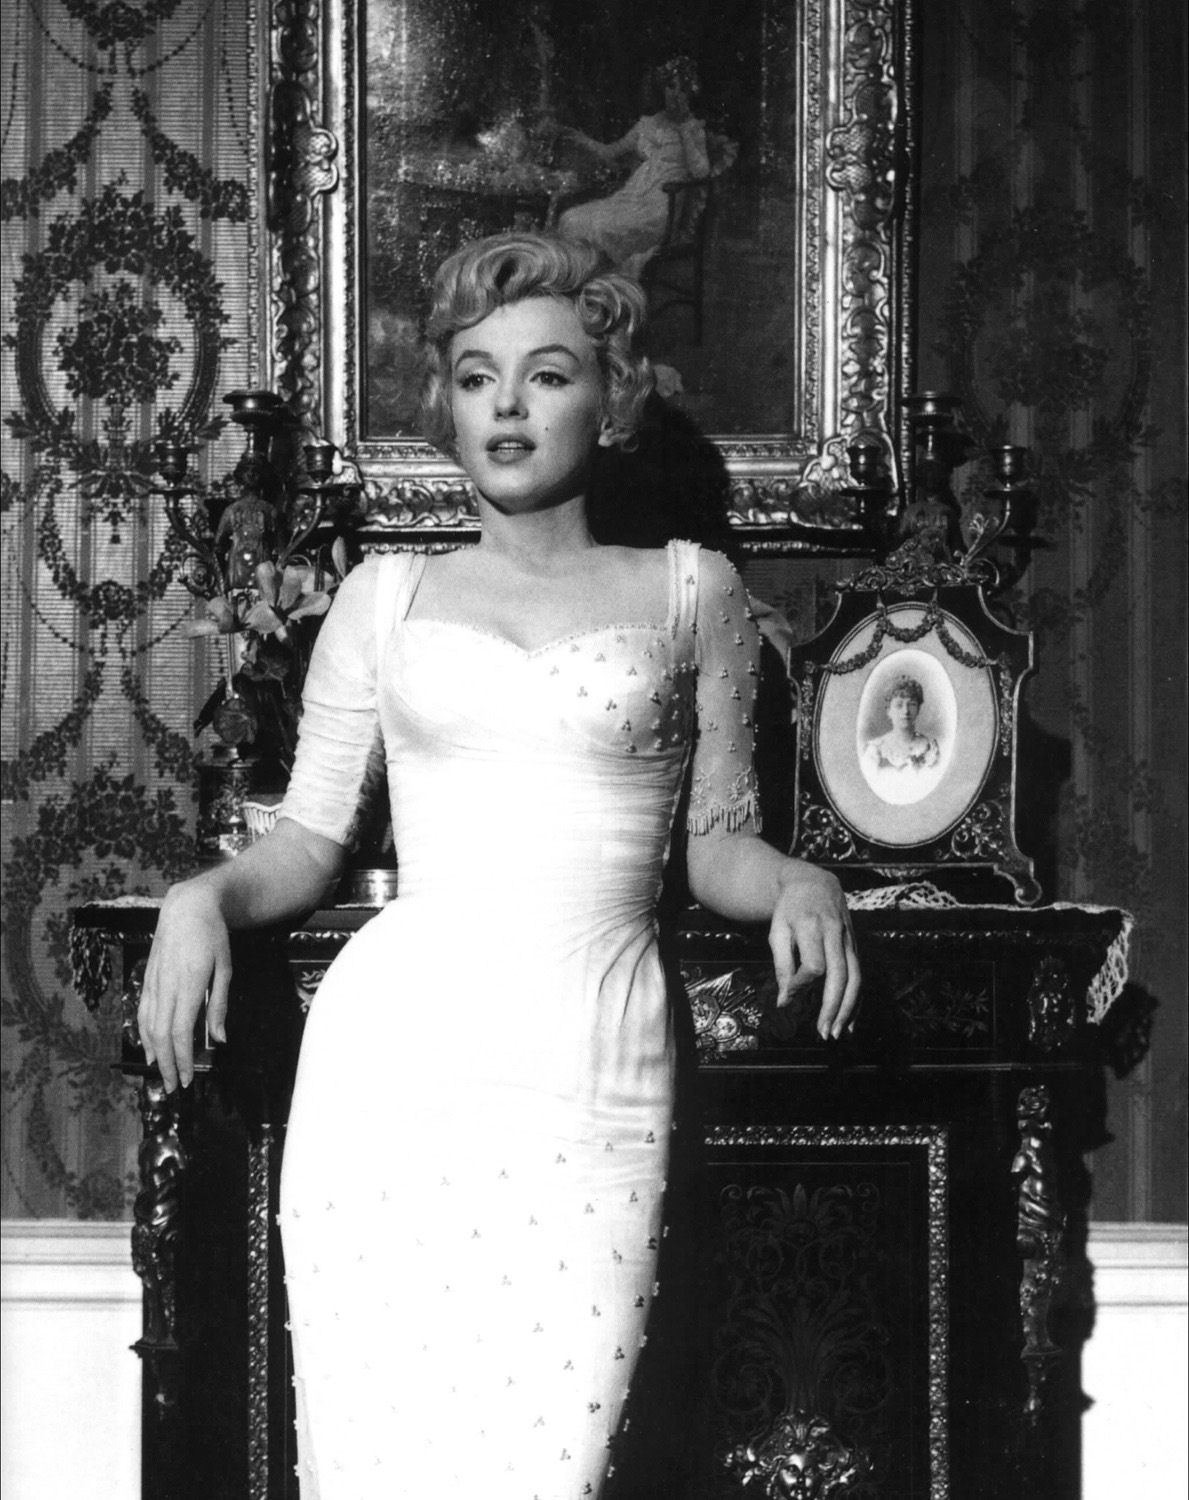 http://upload.wikimedia.org/wikipedia/commons/d/d9/Marilyn_Monroe,_The_Prince_and_the_Showgirl,_1.jpg